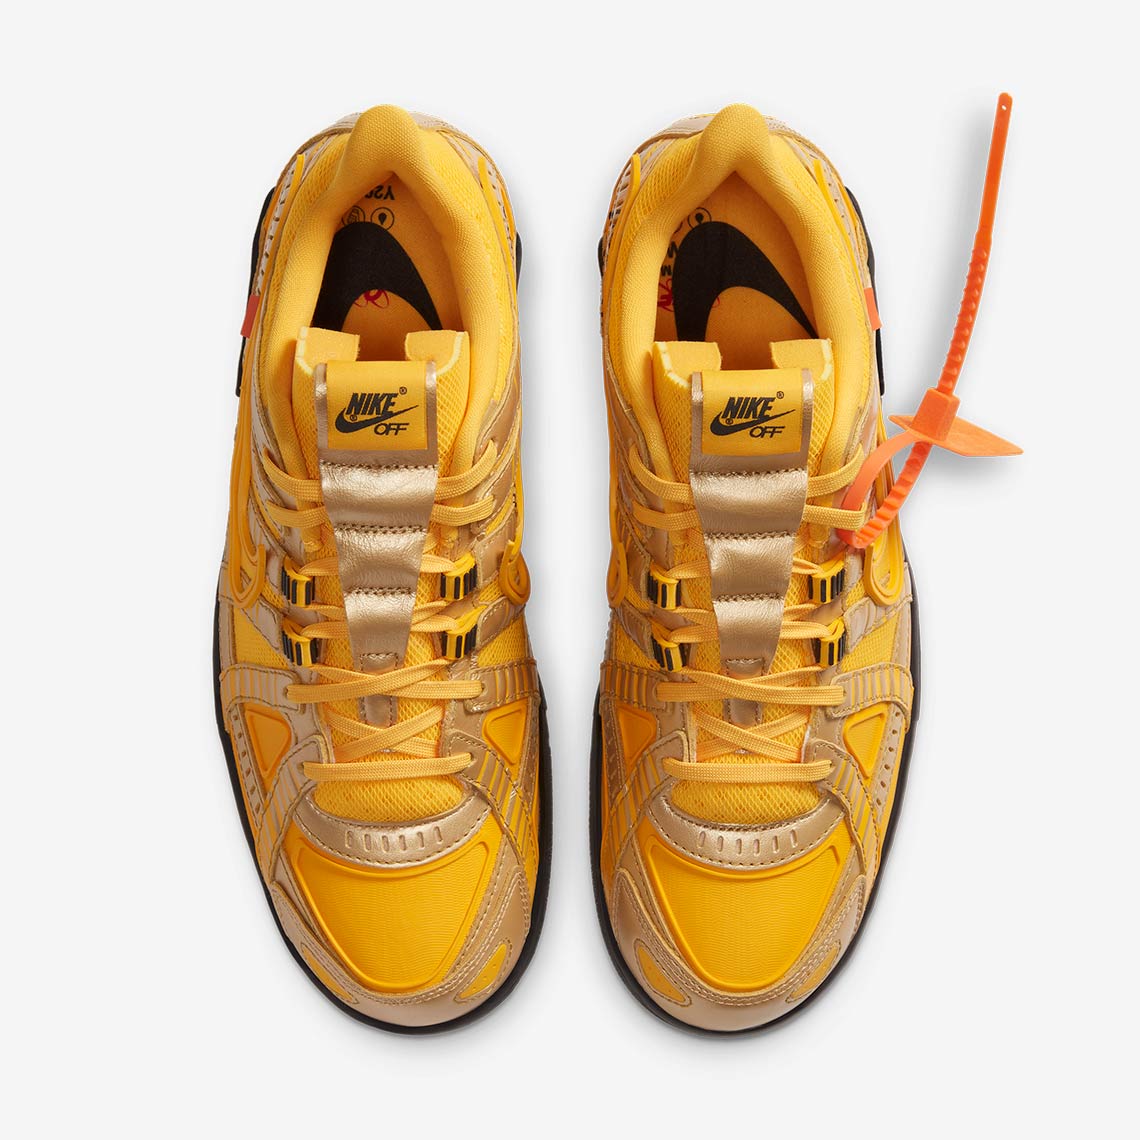 Off White Nike Rubber Dunk Yellow Cu6015 700 4 1